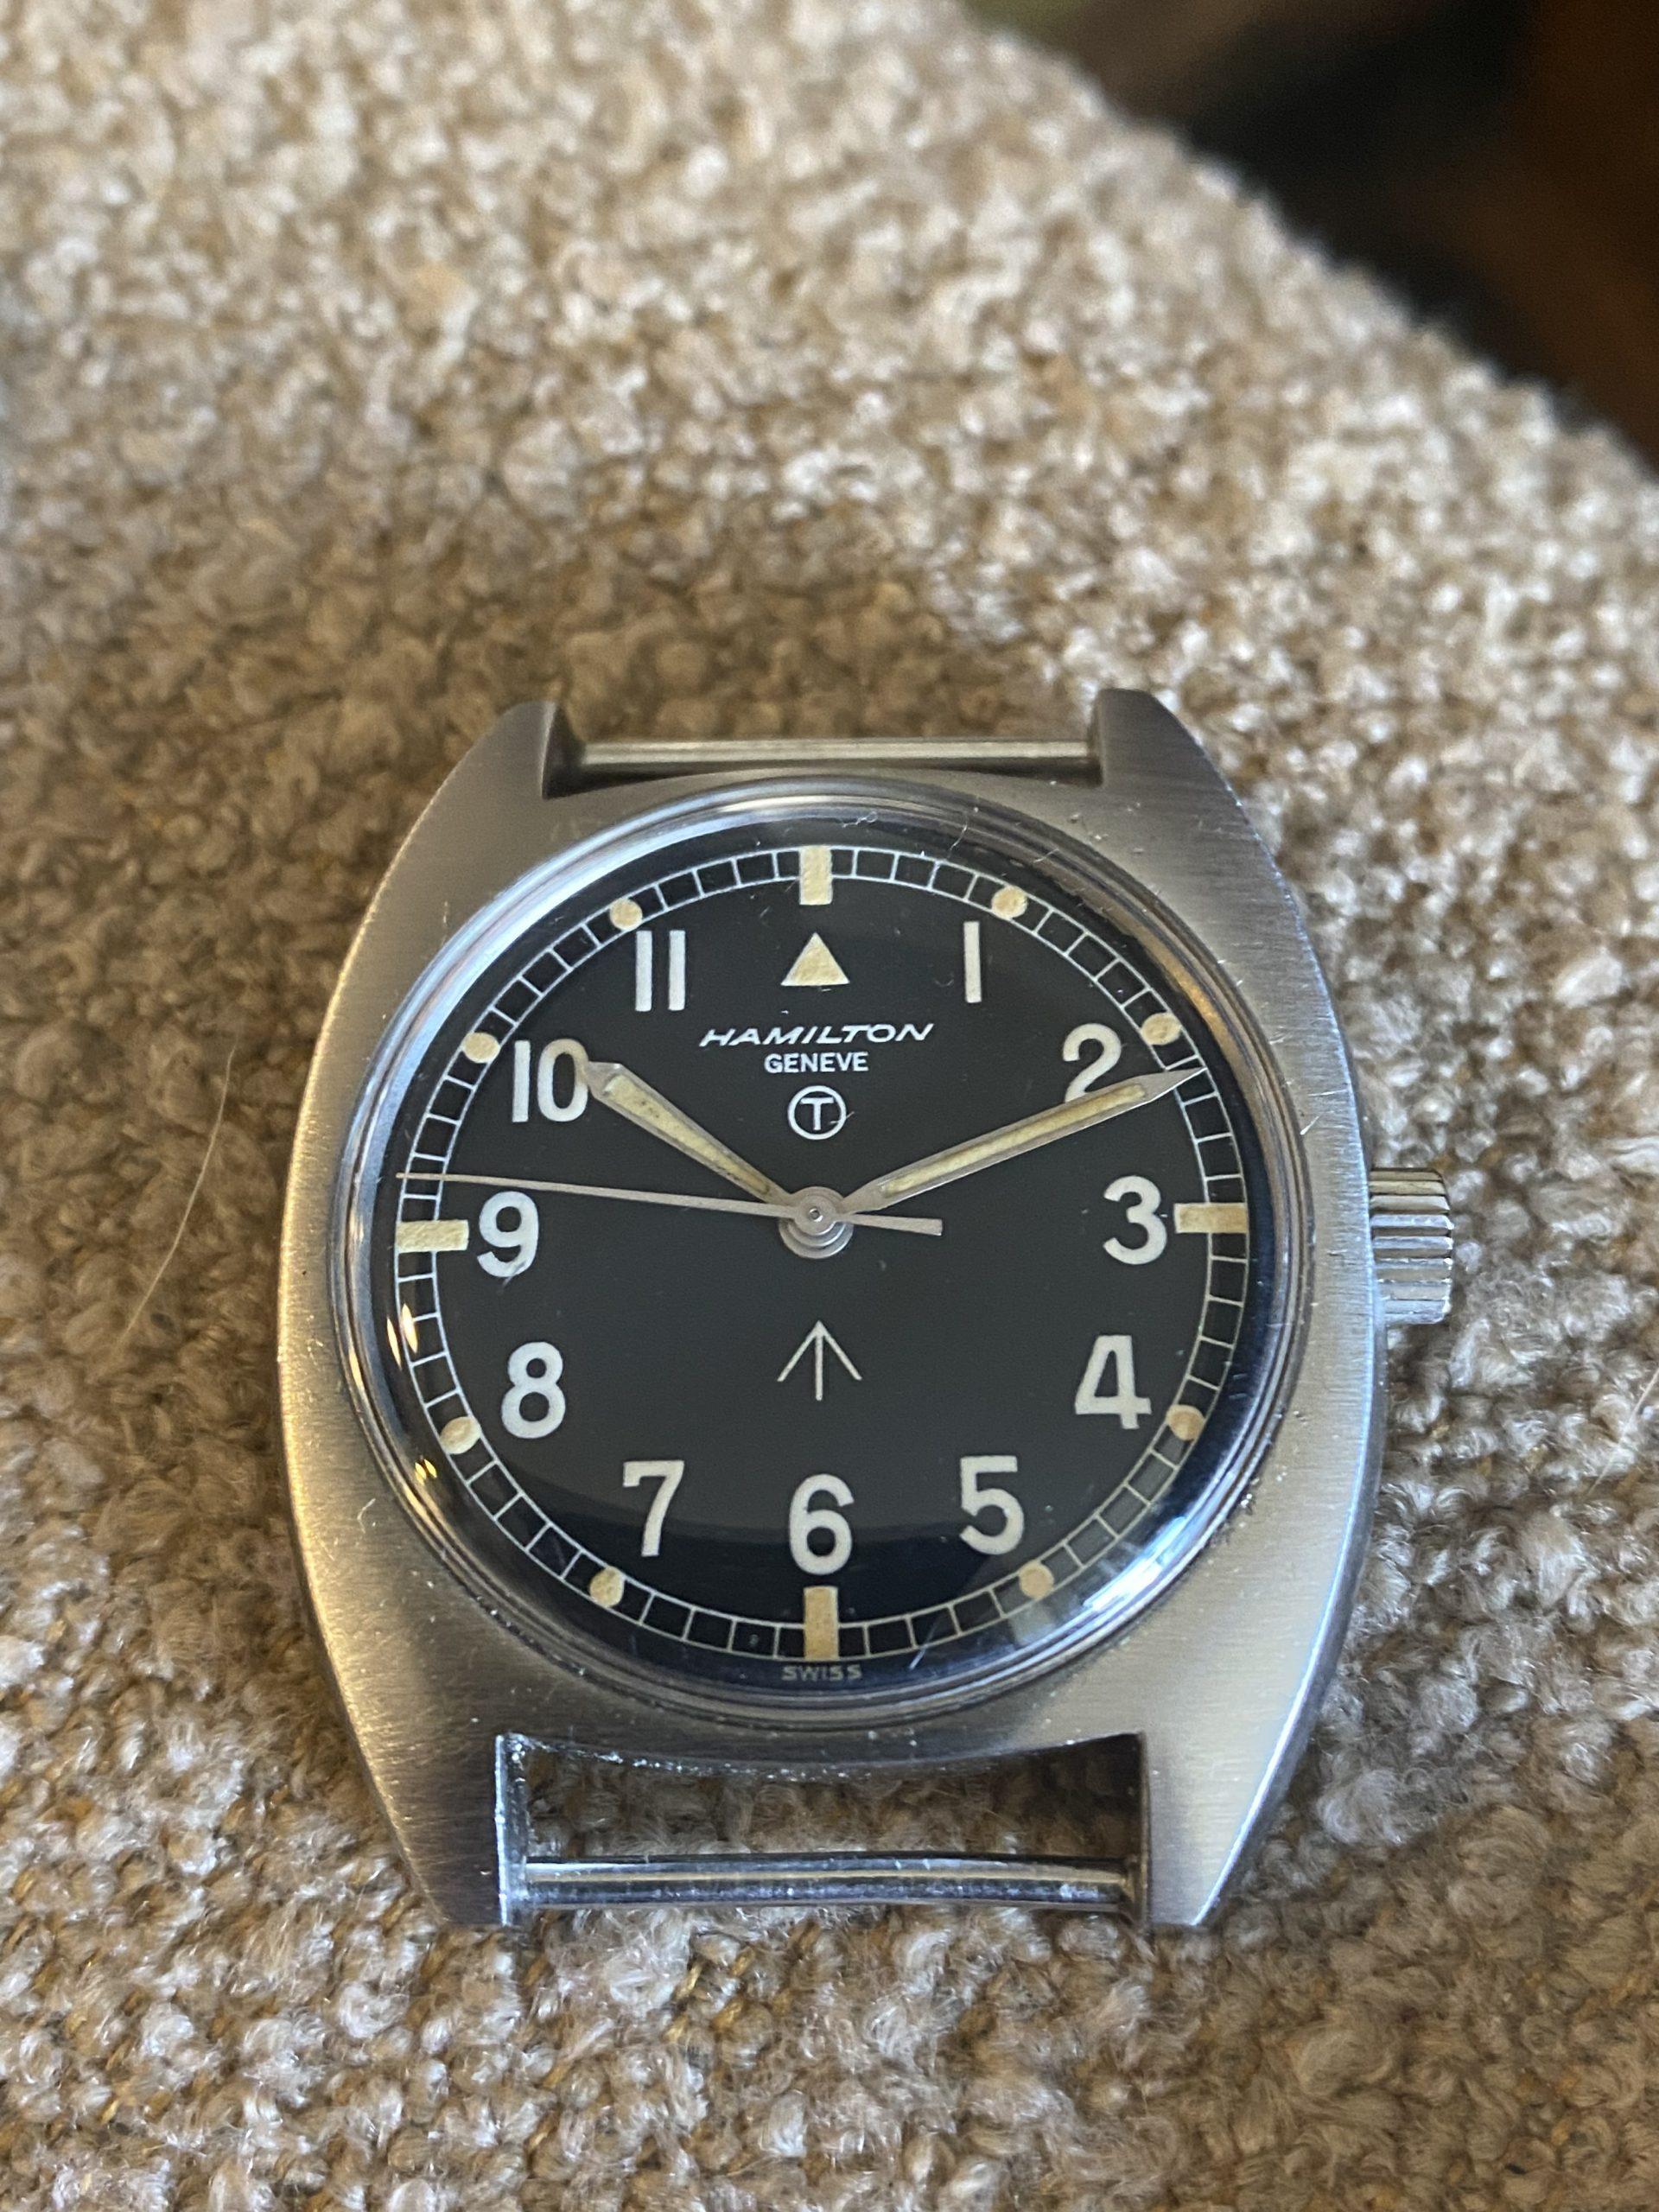 Movado Watches: RAF Issues| Fellows Blog